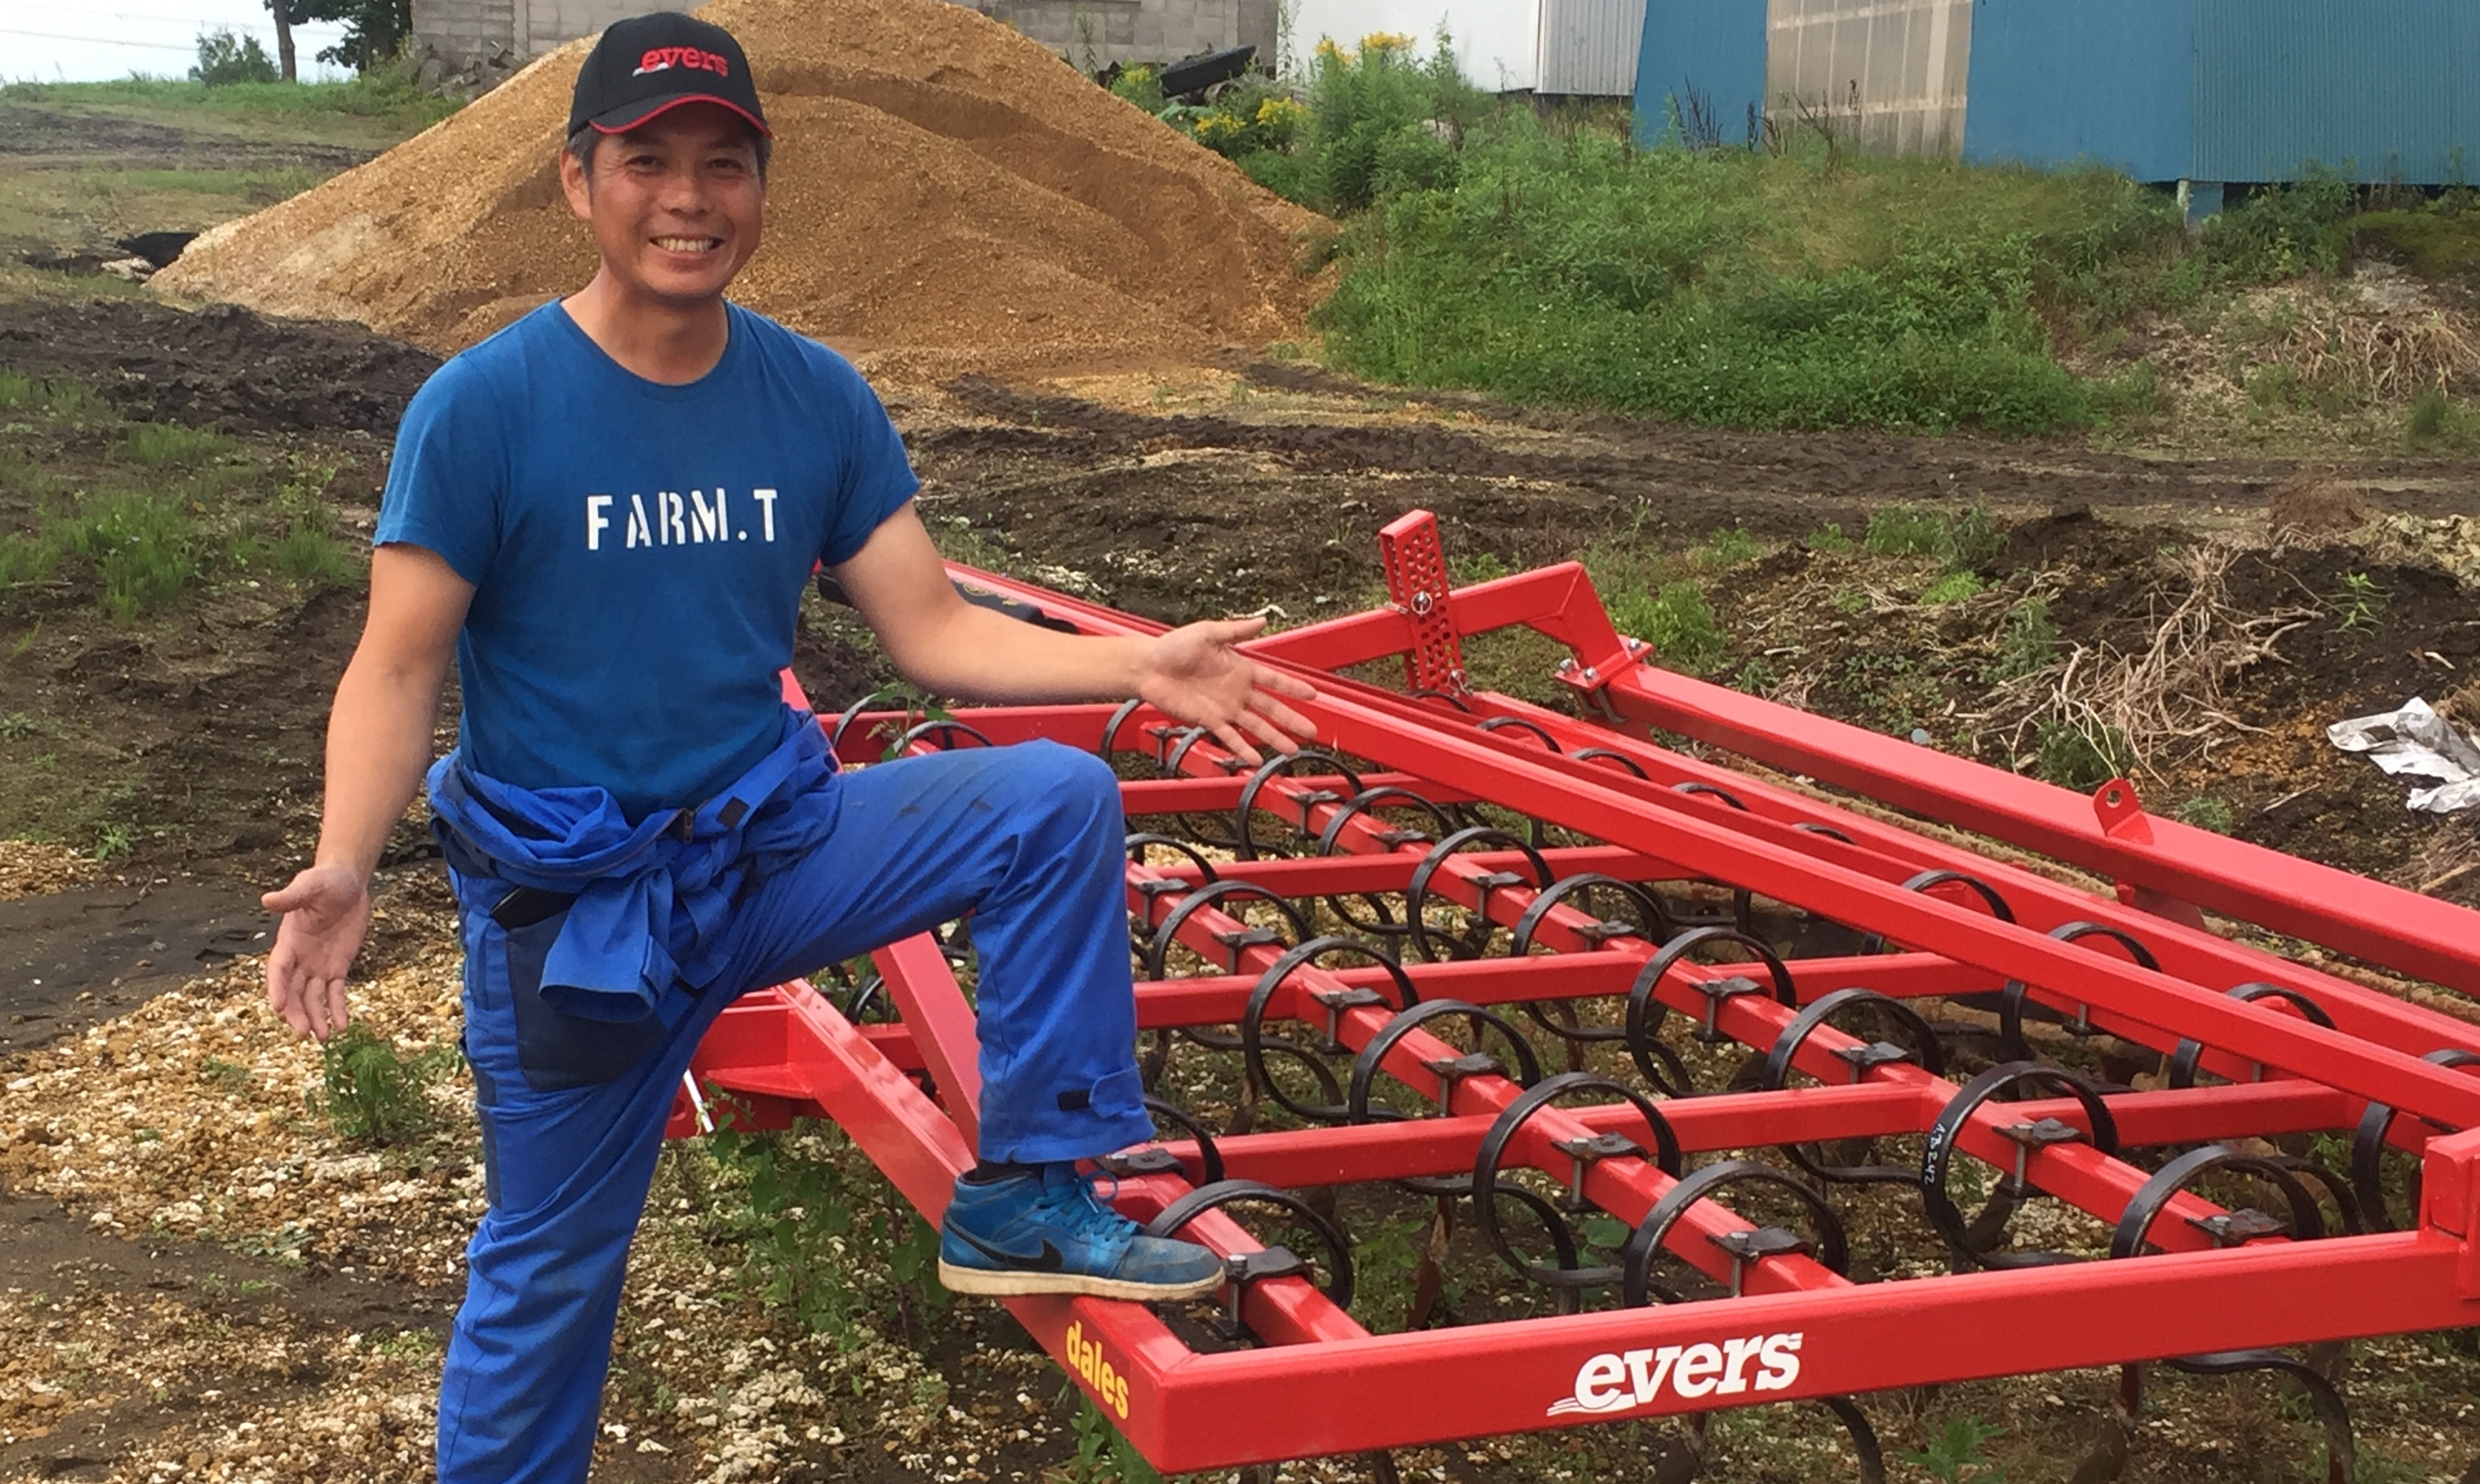 Mr. Takahashi, Abira, Japan: Evers Dales Spring tine cultivator “Strong construction, good frame clearance, better than local manufacturer.“